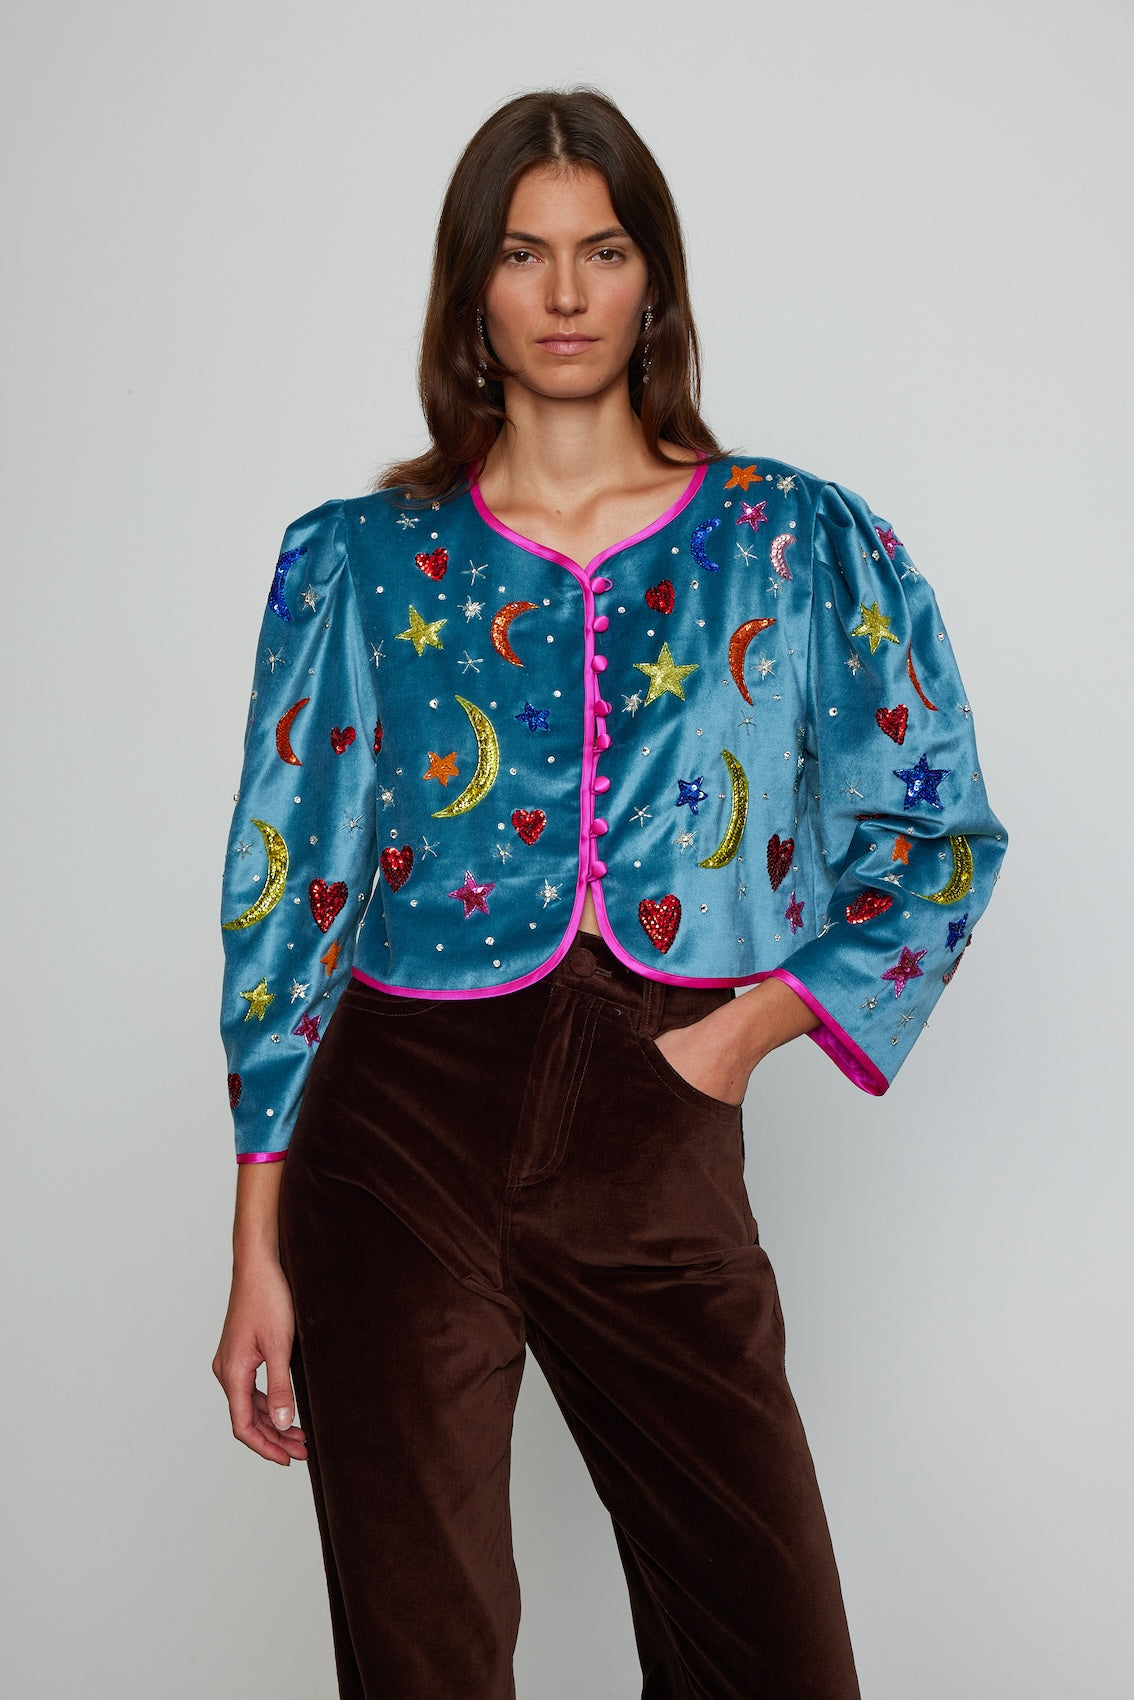 Caro Editions Blanca Jackets is one-of-kind, exquisitely hand-embroidered by skilled artisans using beads and sequins. This vibrant jacket is made in soft cotton velvet with silk lining and petit silk-covered buttons.  Material: 100% cotton. Lining: 100% silk satin. Beading: polyester & glass.